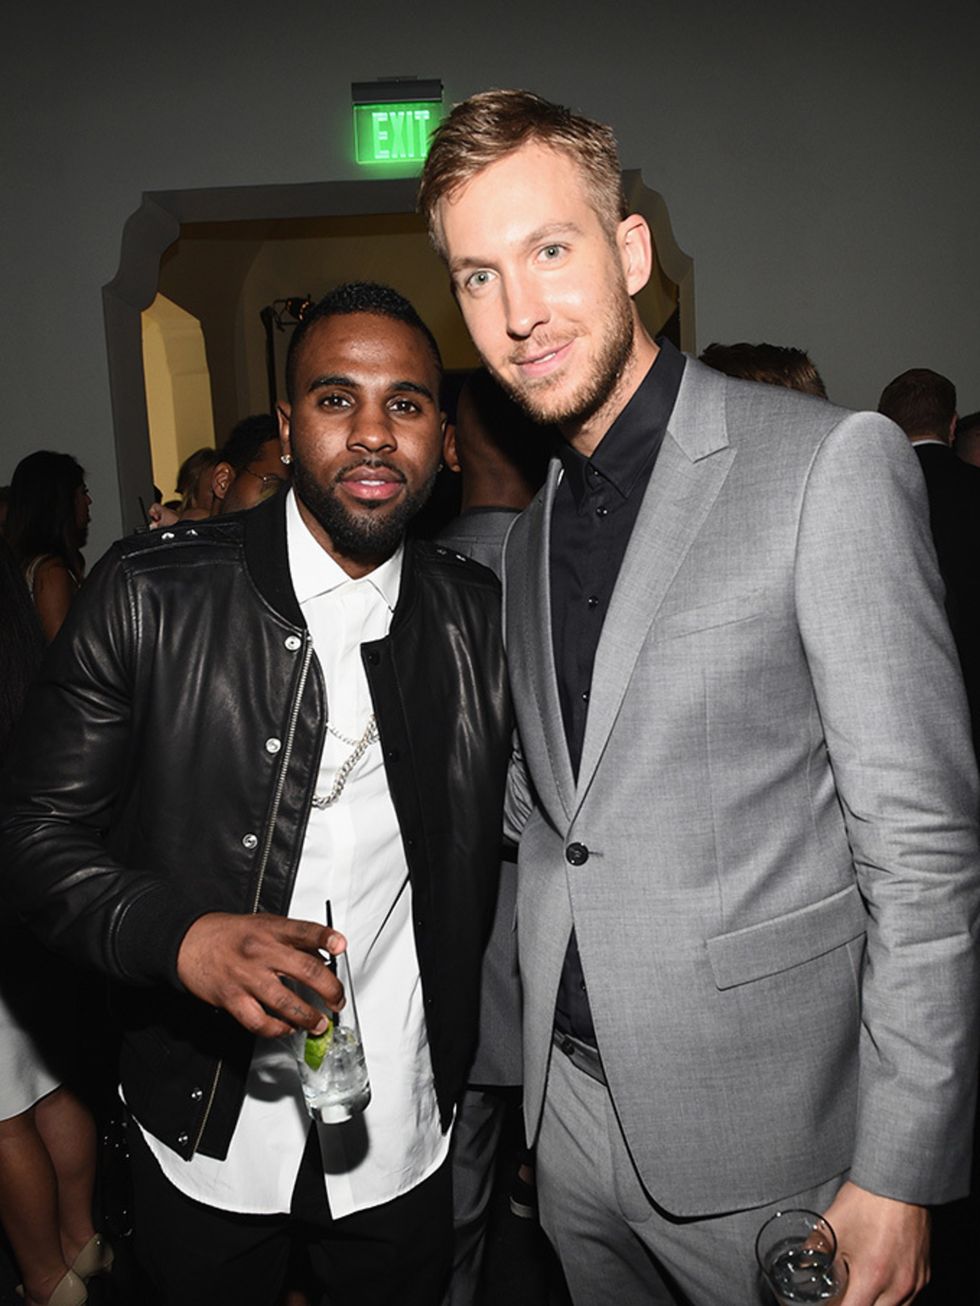 Jason Derulo and Calvin Harris attend GQ And Giorgio Armani's Grammys After Party, February 2015.